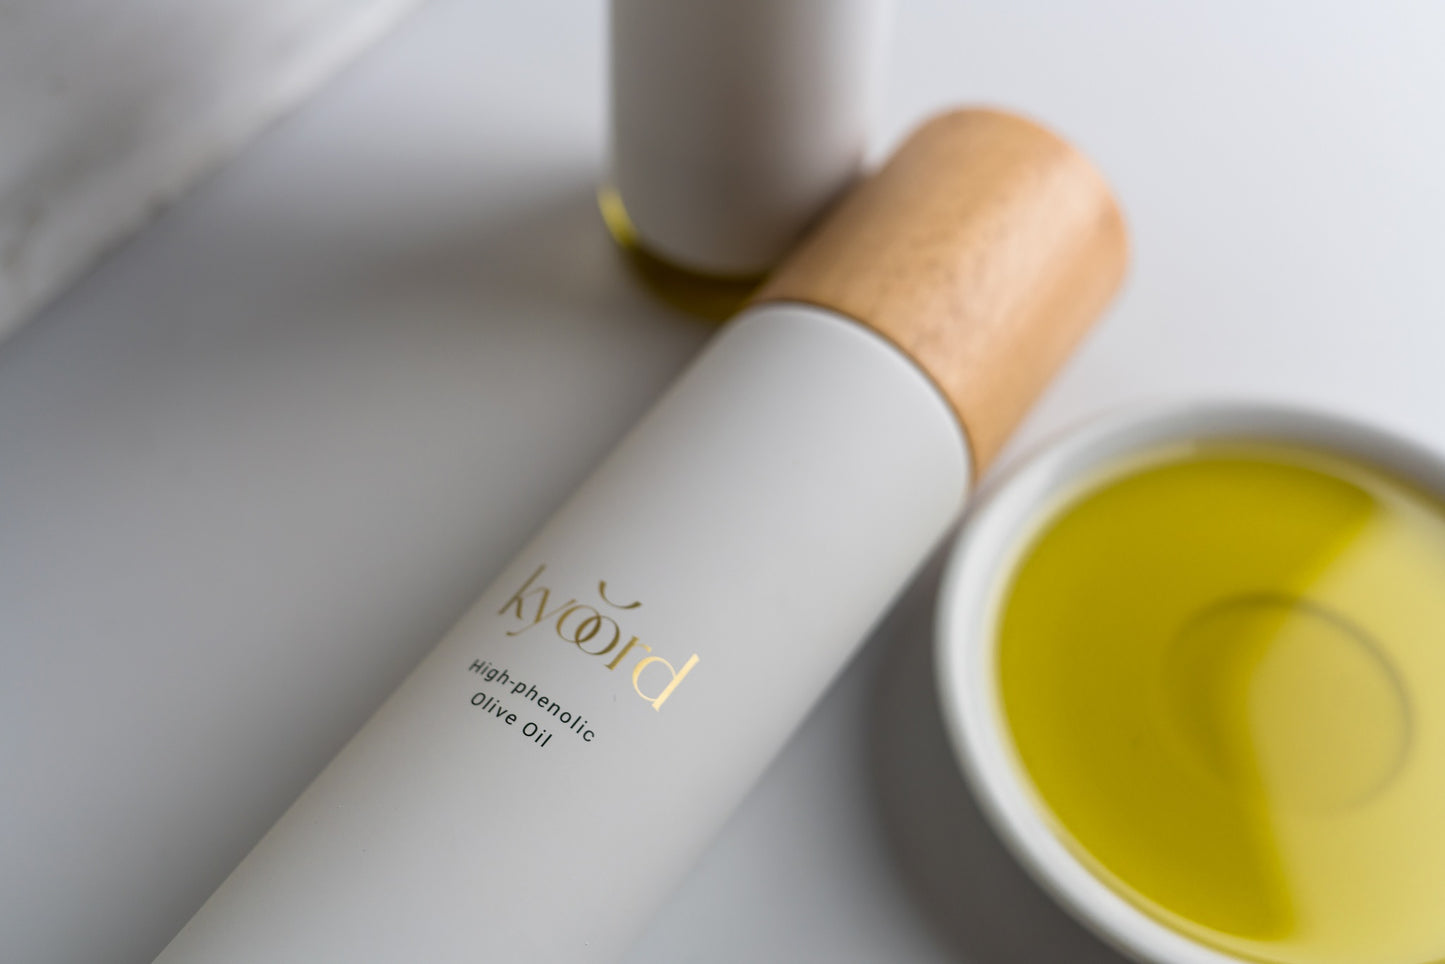 kyoord High-phenolic Olive Oil - Full Case of 12